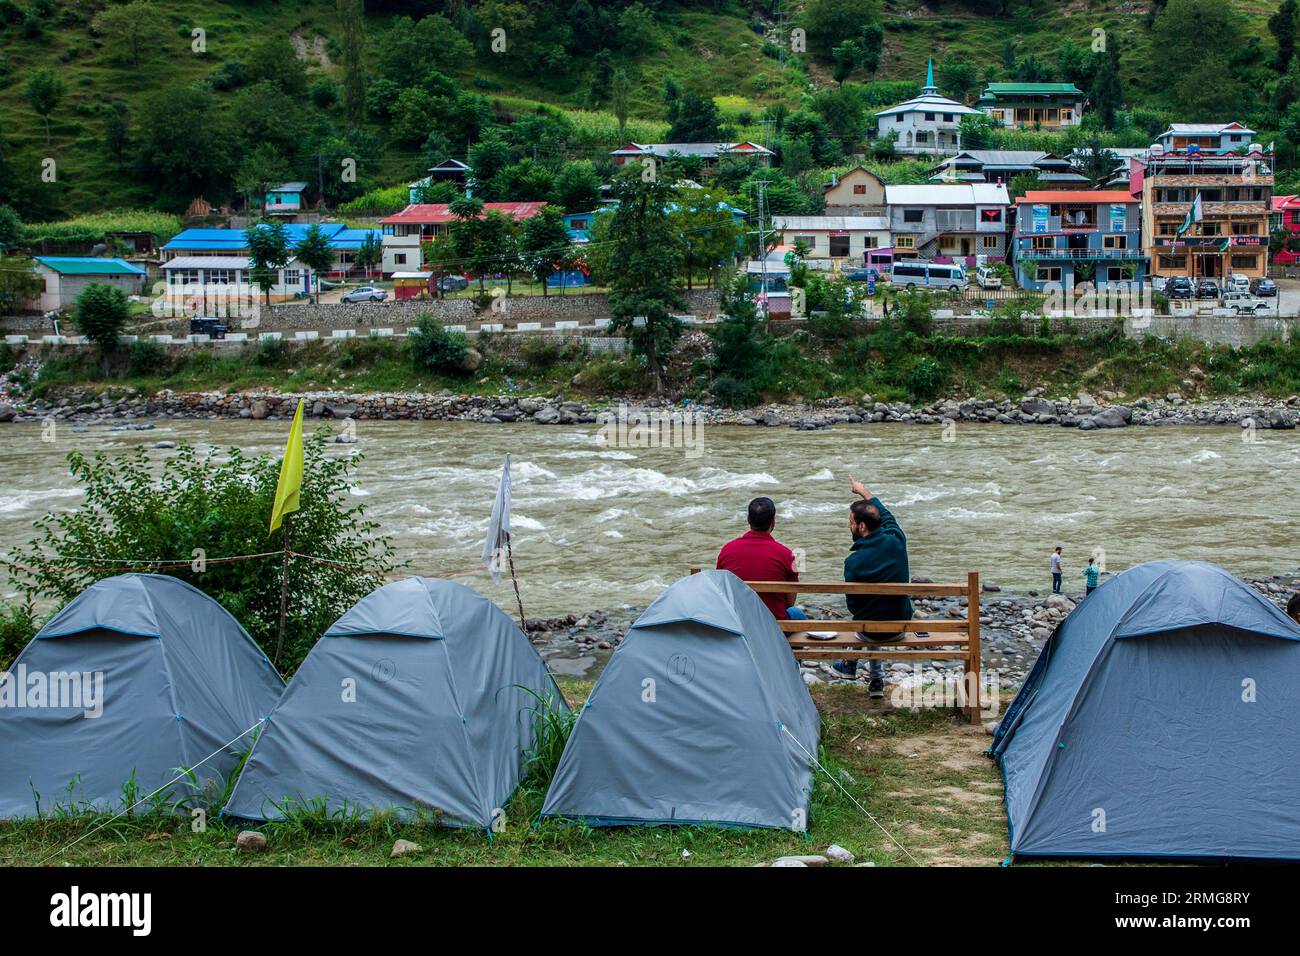 August 25, 2023, Keran Kupwara, Jammu and Kashmir, India: Camping tents are installed on the banks of Neelam river or Kishan Ganga that has divided Kashmir into two parts controlled by nuclear rivals India and Pakistan. The river acts as a disputed line of control and flows through a village called Keran from both sides which is located on the northern side of Indian Kashmir's Border district Kupwara some 150kms from Srinagar and 93kms from Muzaffarabad, in the Pakistan side of Kashmir. (Credit Image: © Faisal Bashir/SOPA Images via ZUMA Press Wire) EDITORIAL USAGE ONLY! Not for Commercial USA Stock Photo